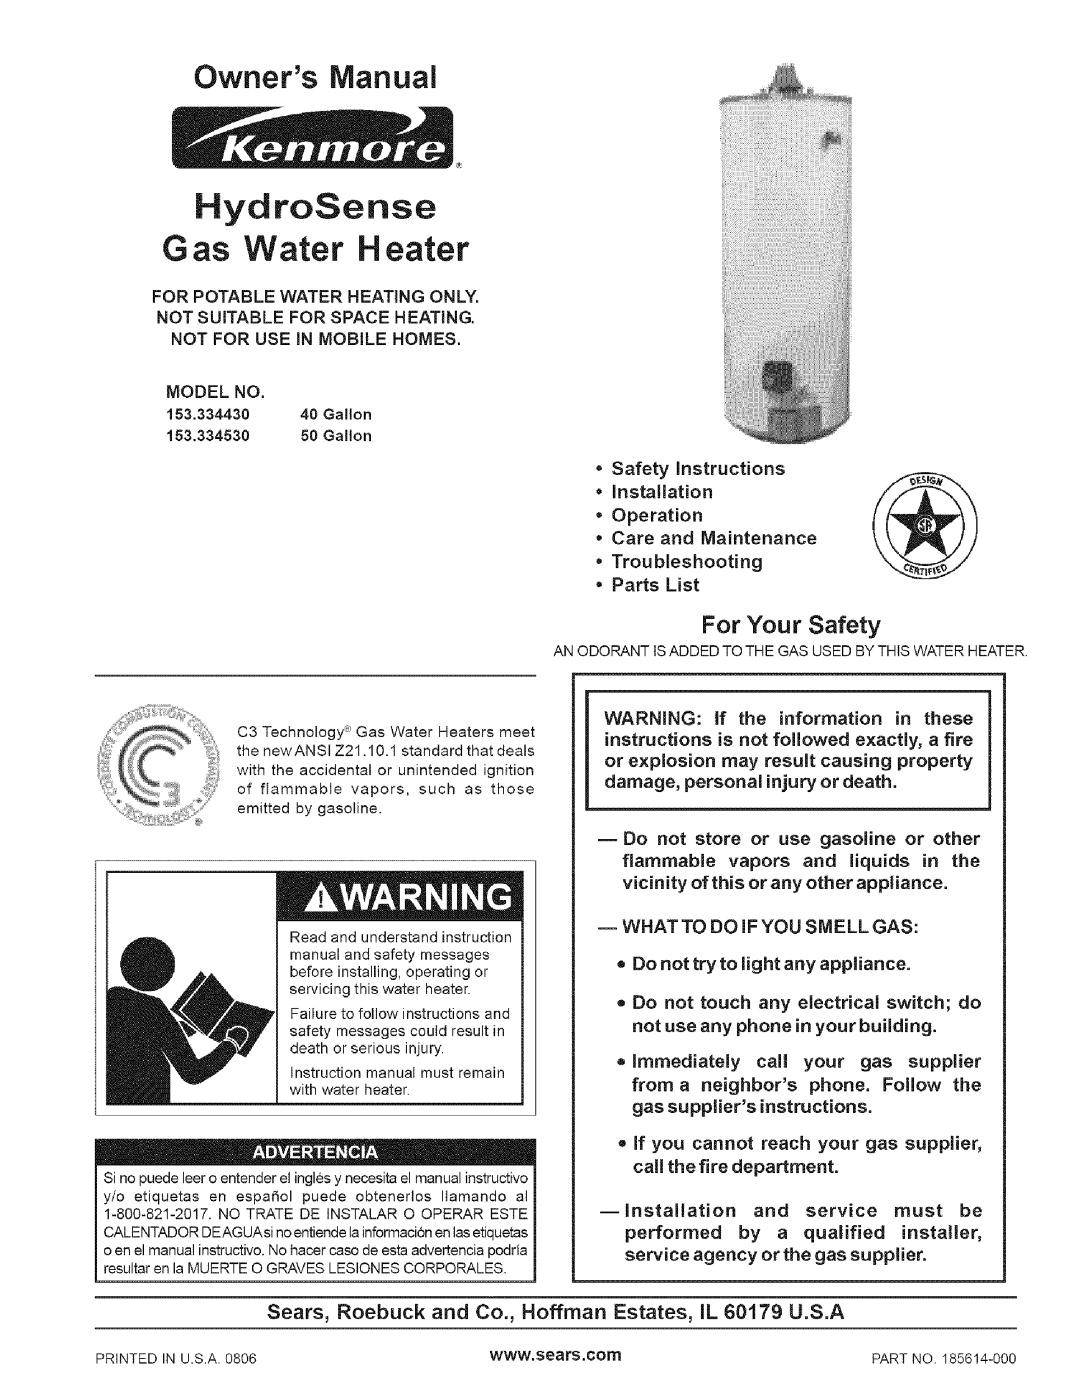 Kenmore 334, 530 owner manual For Your Safety, HydroSense, G as Water H eater, Owners Manual, Not For Use In Mobile Homes 